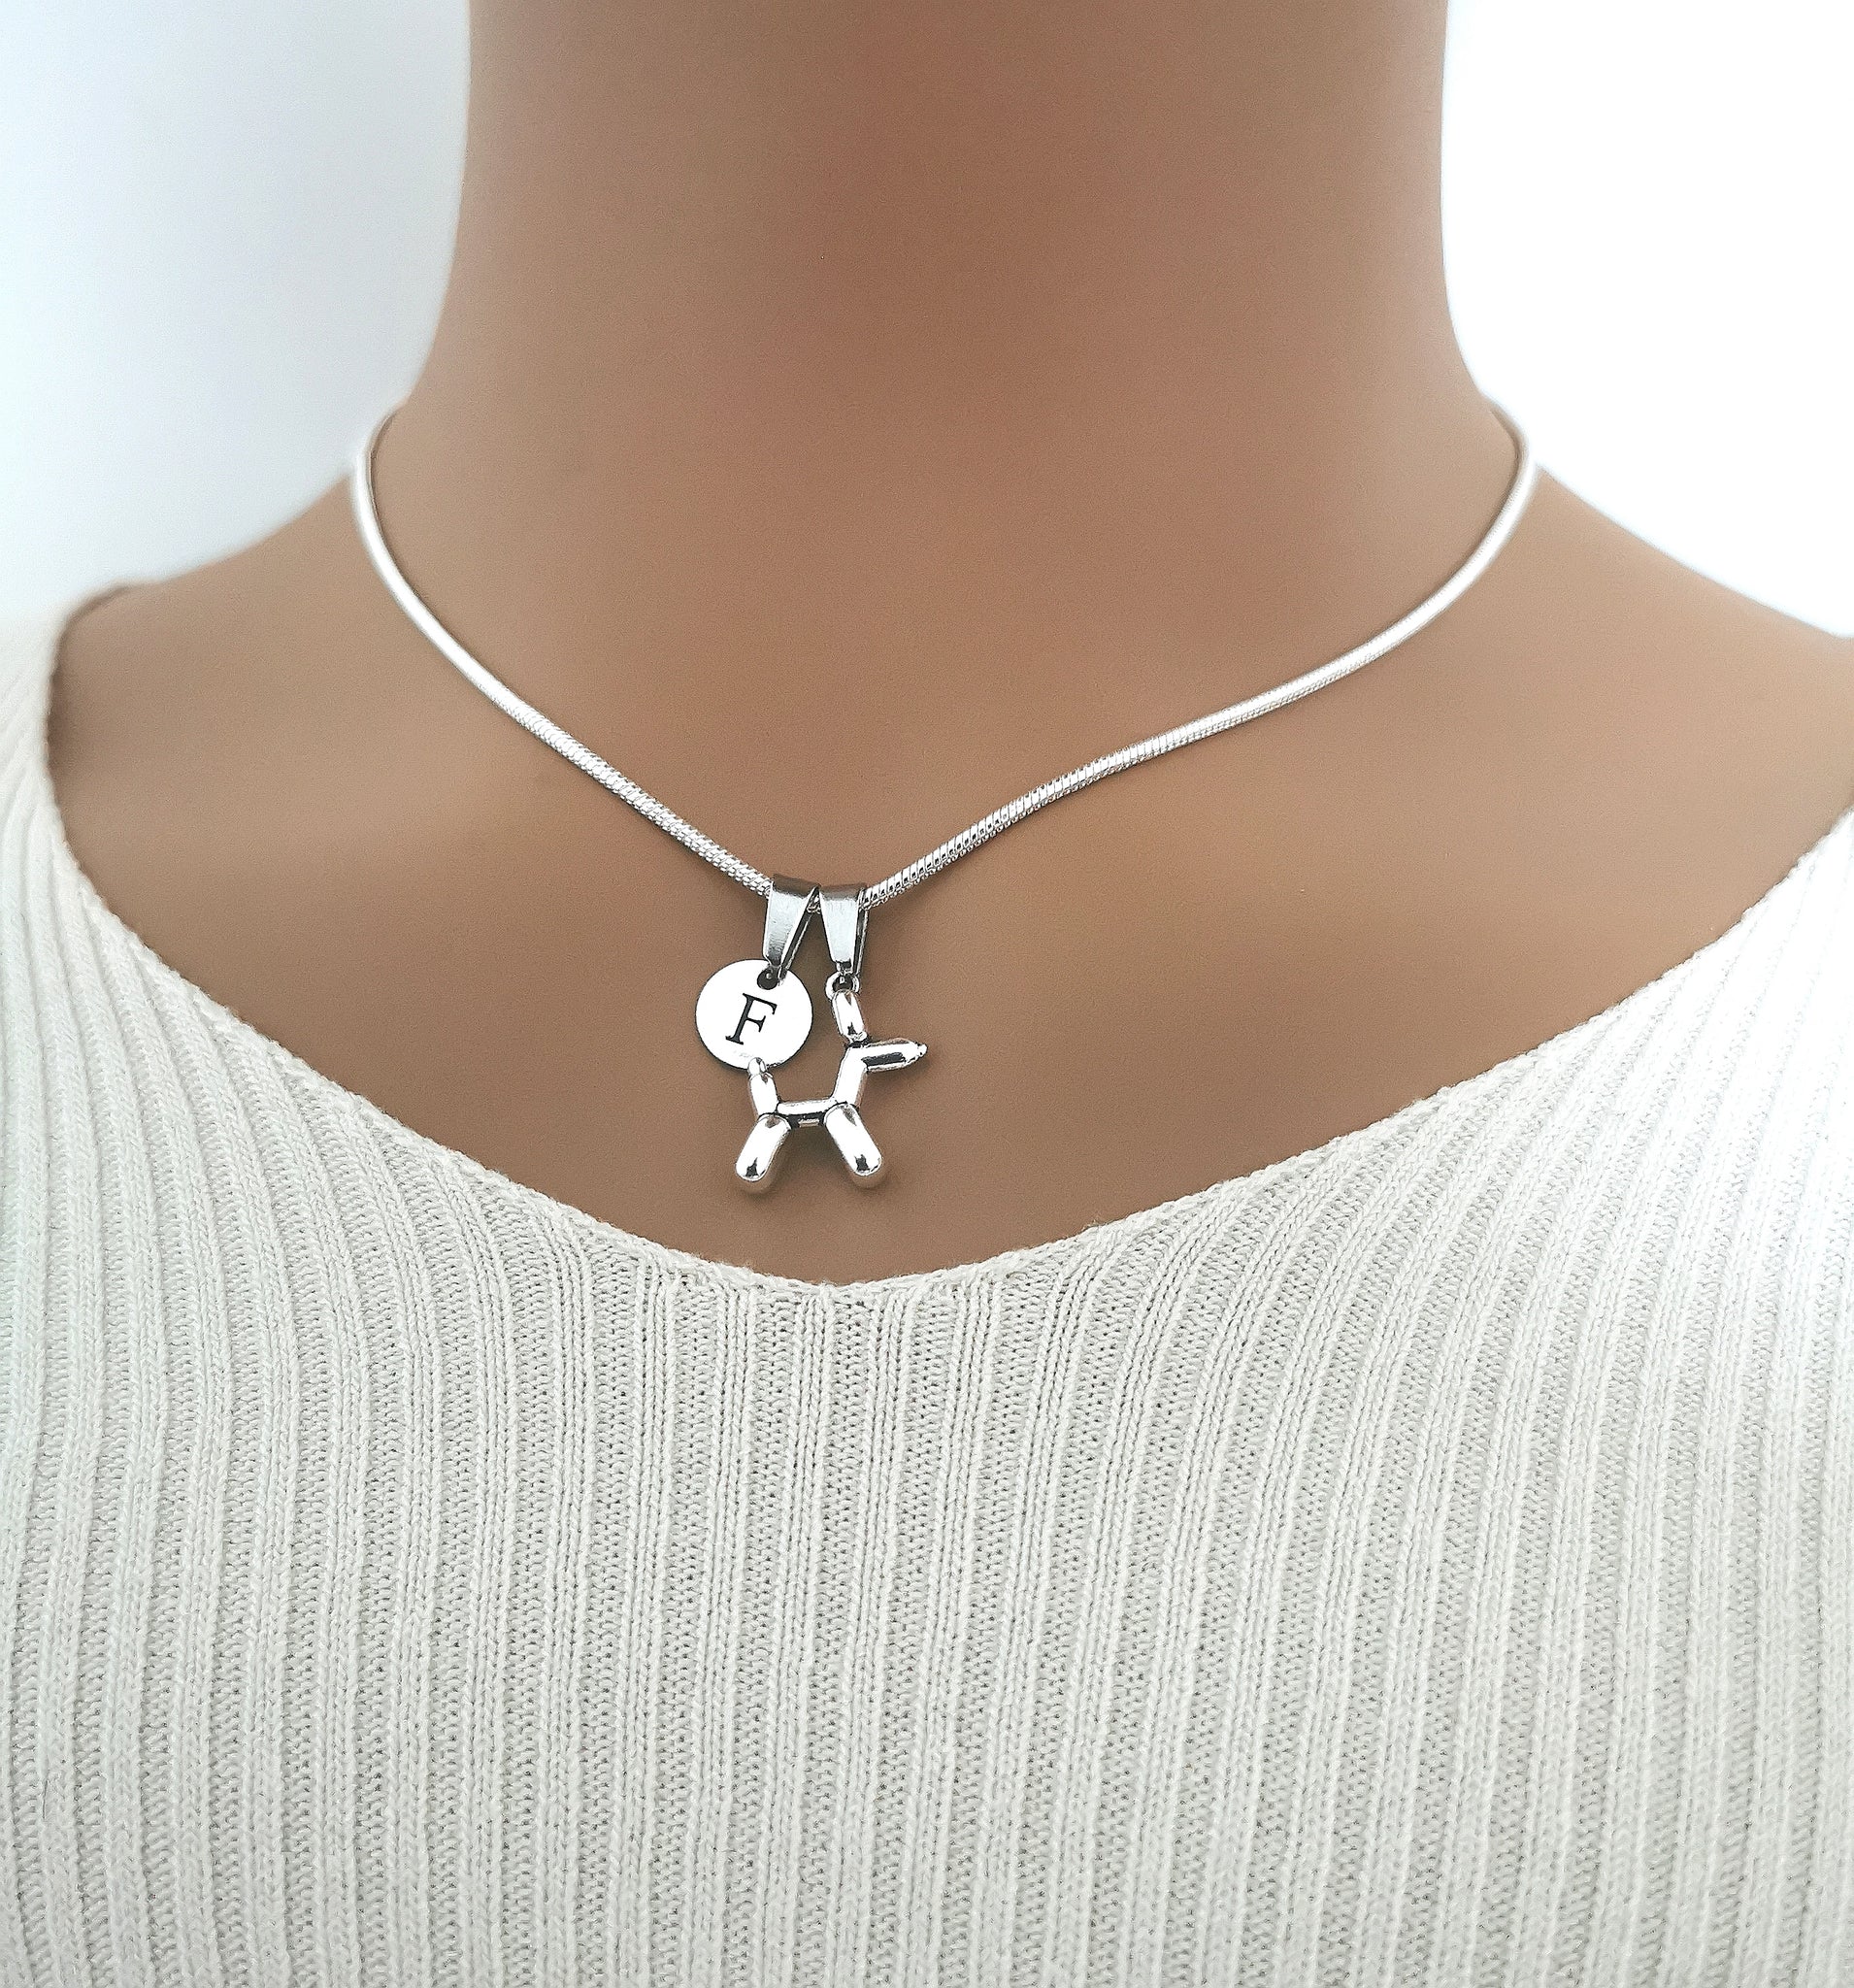 Chic Silver Poodle Necklace - Stylish Dog Charm Gift with 18" length - Perfect for Poodle enthusiasts - YouLoveYouShop